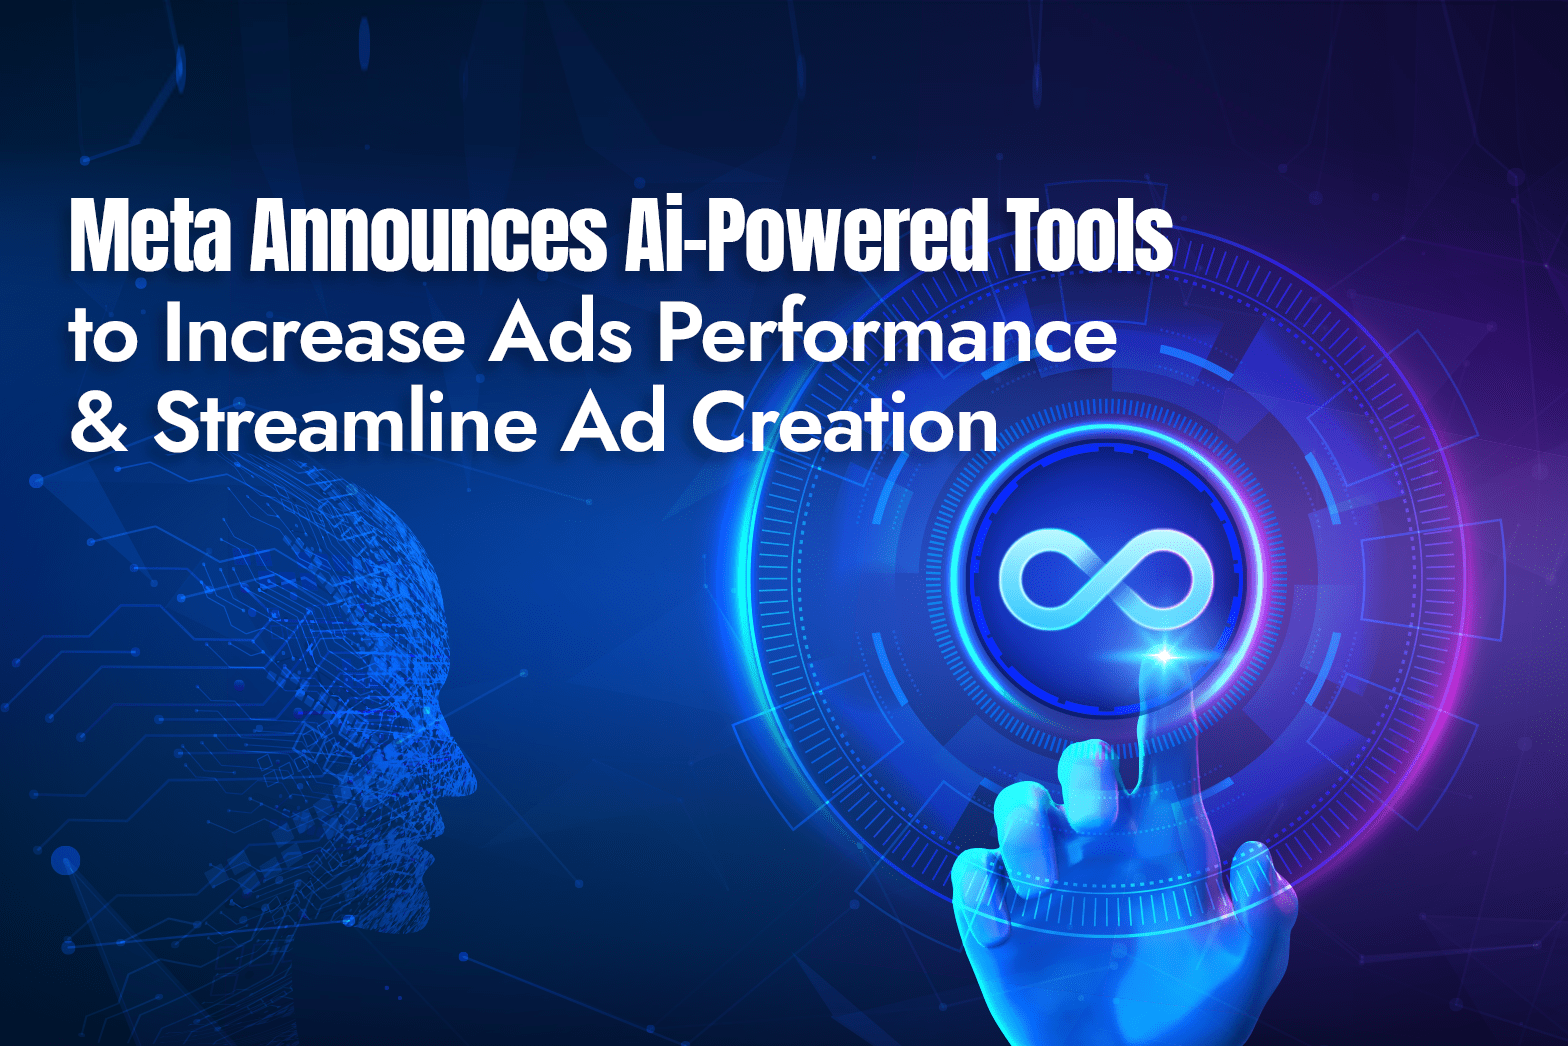 Meta Announces AI-Powered Tools to Increase Ads Performance and Streamline Ad Creation